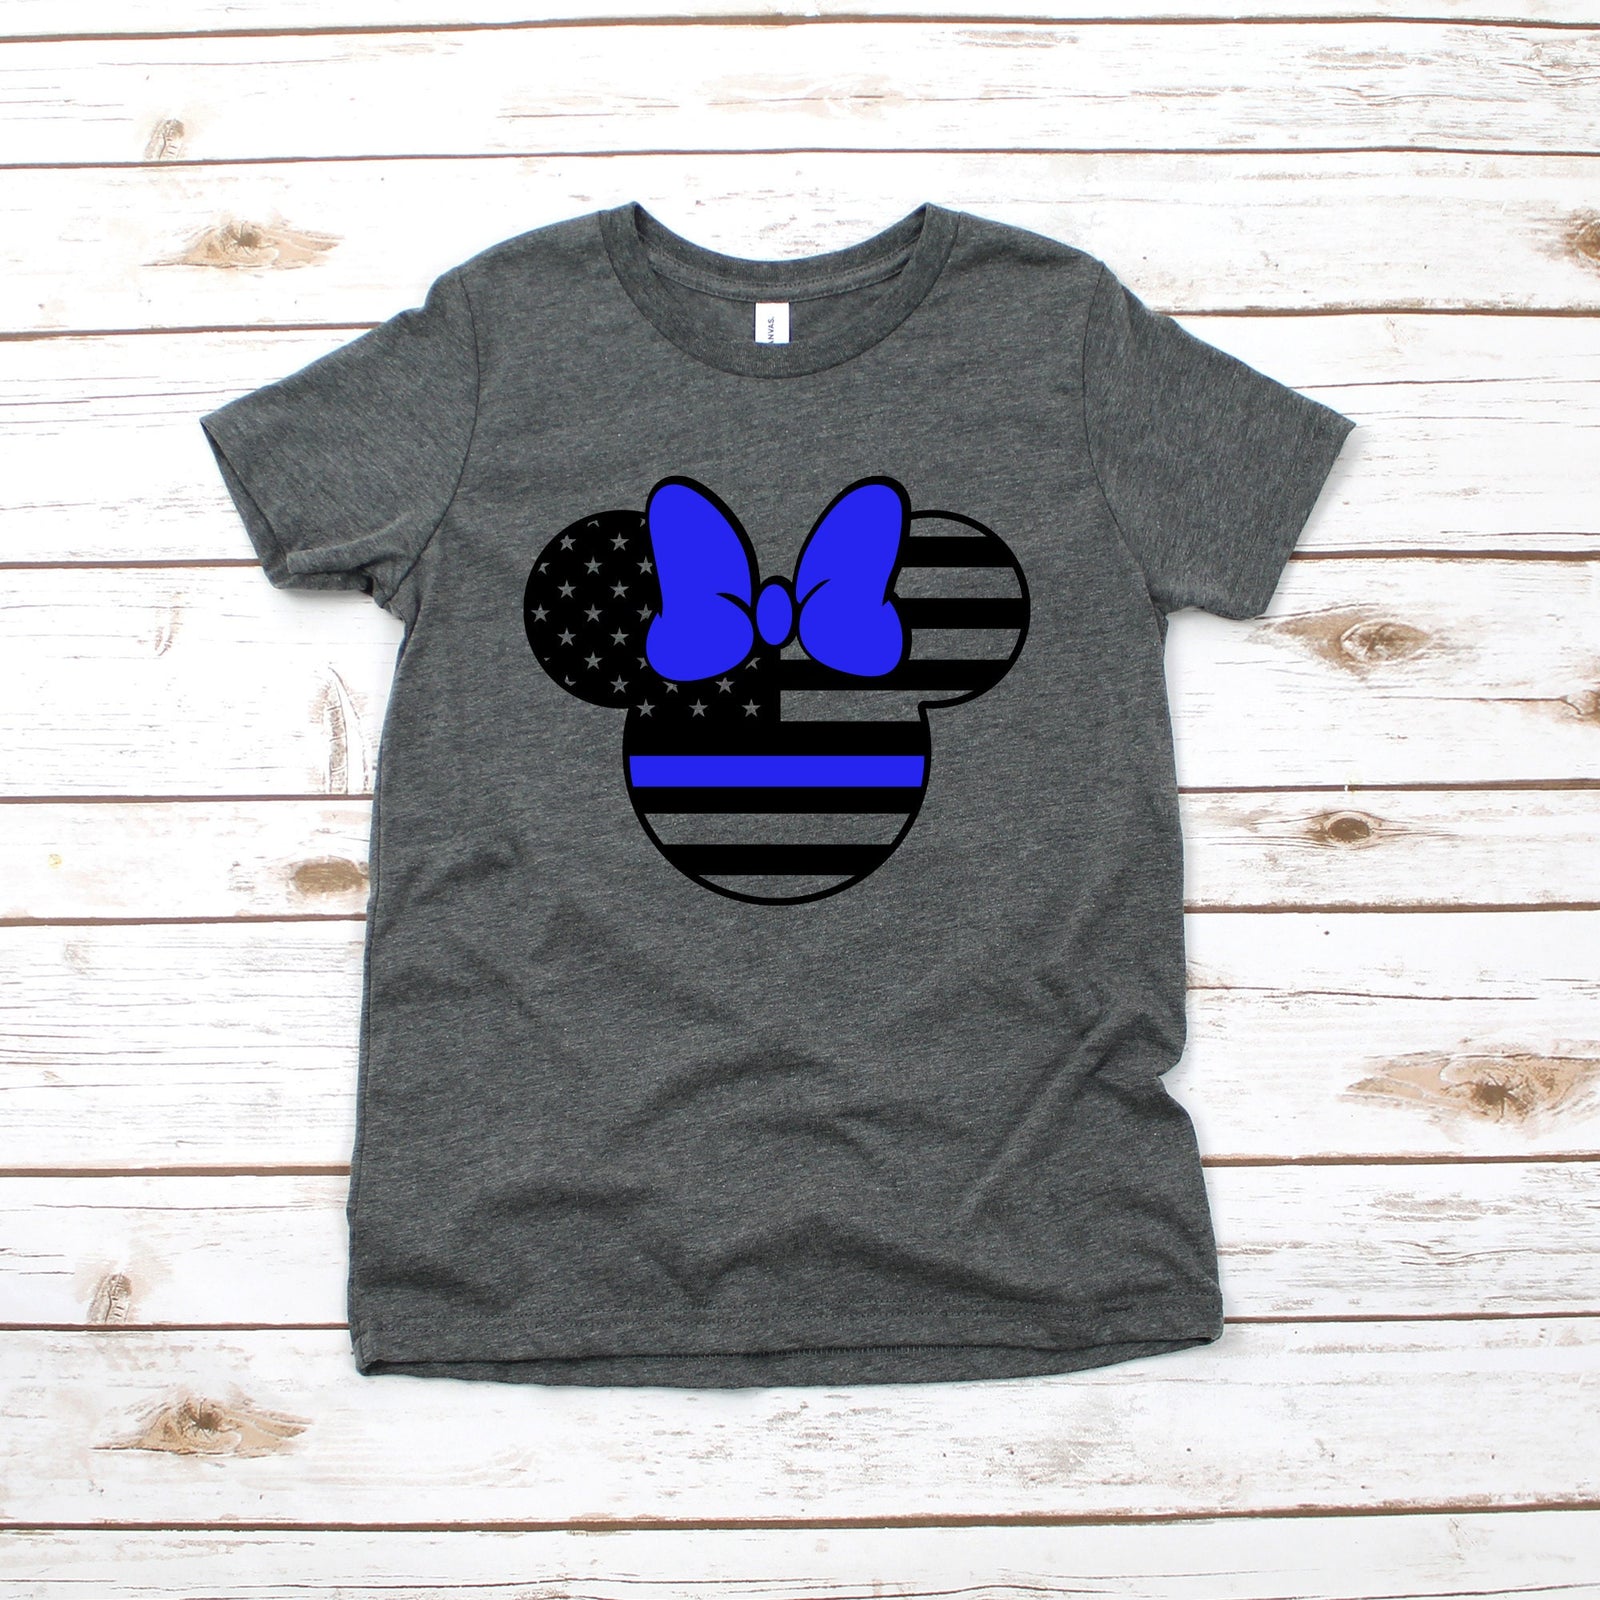 Minnie Mouse Police Stars and Stripes Minnie Kids T Shirt - Infant Toddler Youth Minnie Shirt - Disney Kids Shirts - Family Matching